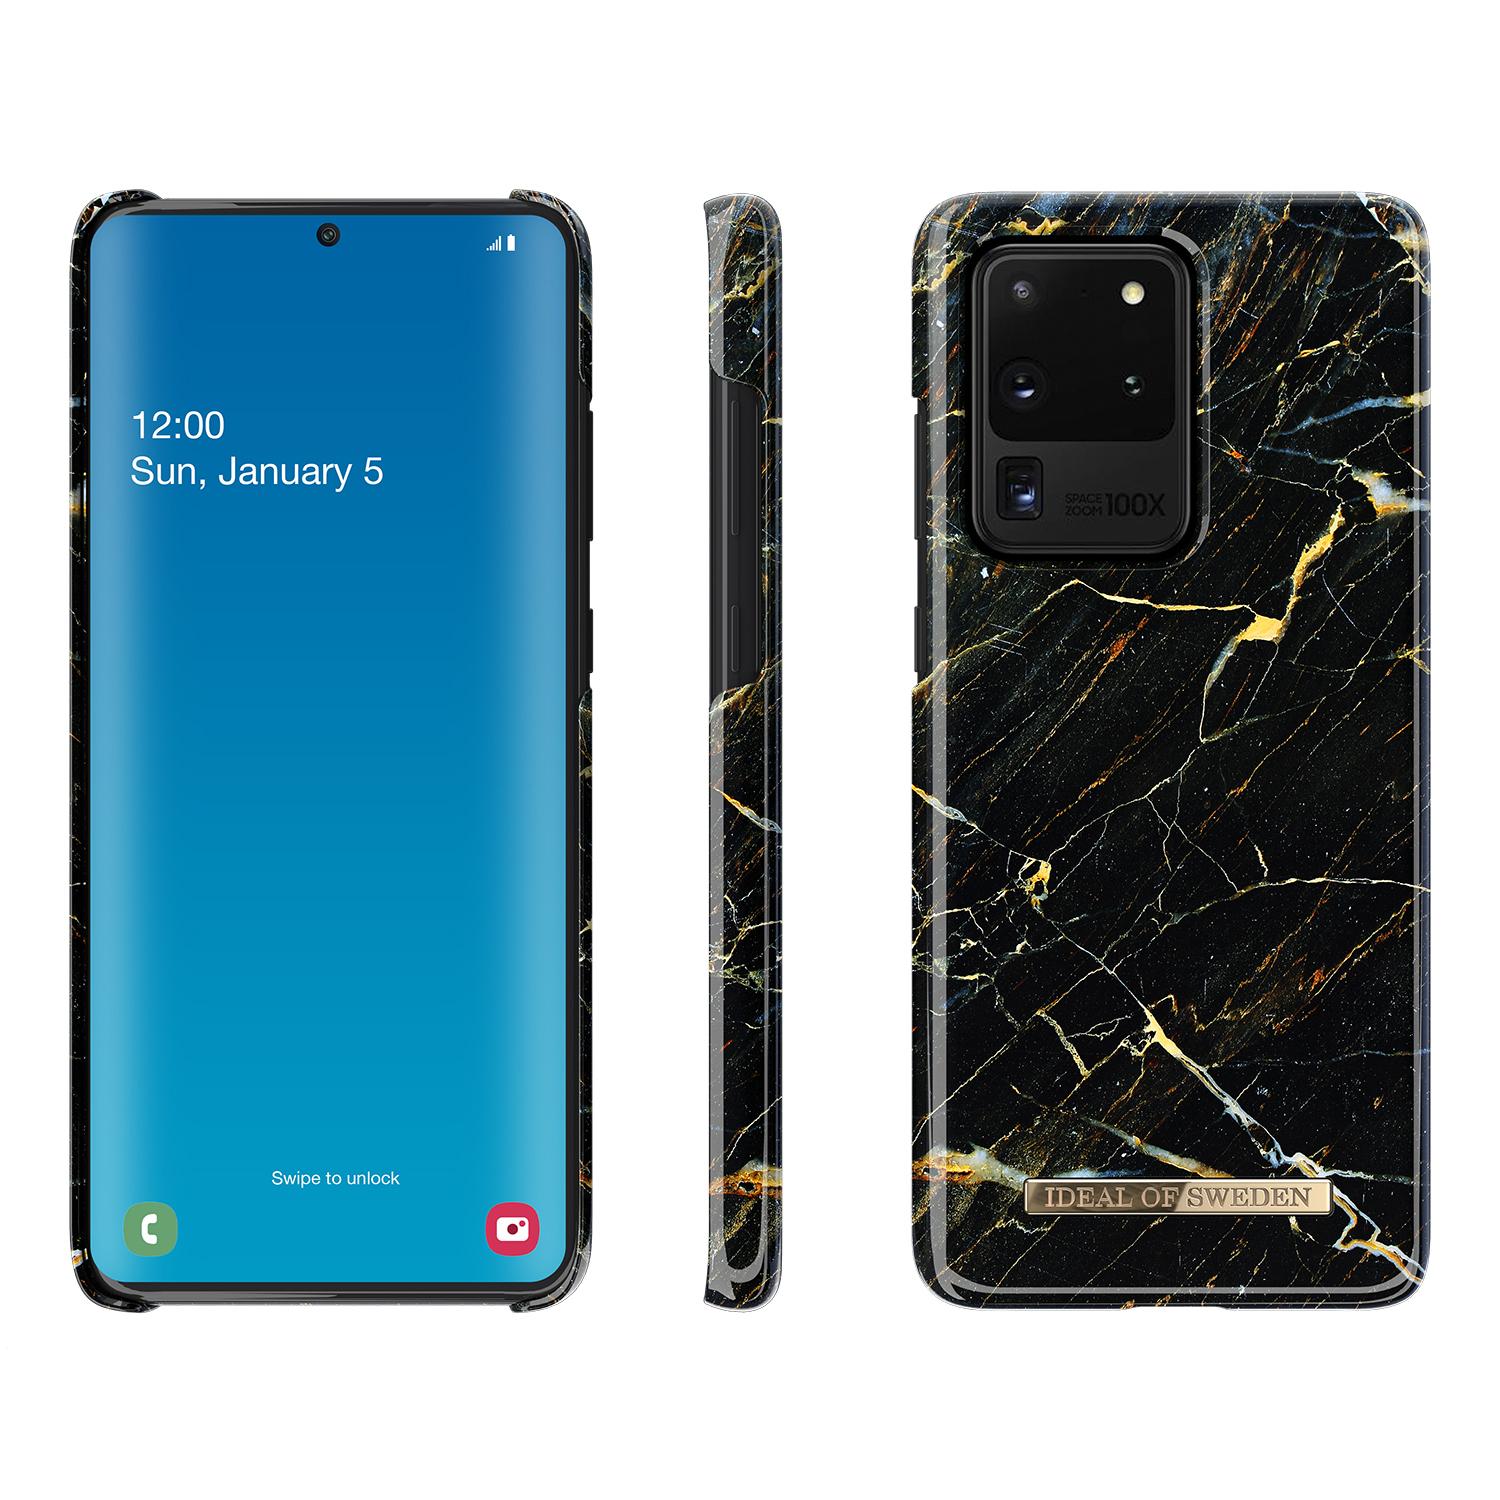 Fashion Case Galaxy S20 Ultra Port Laurent Marble